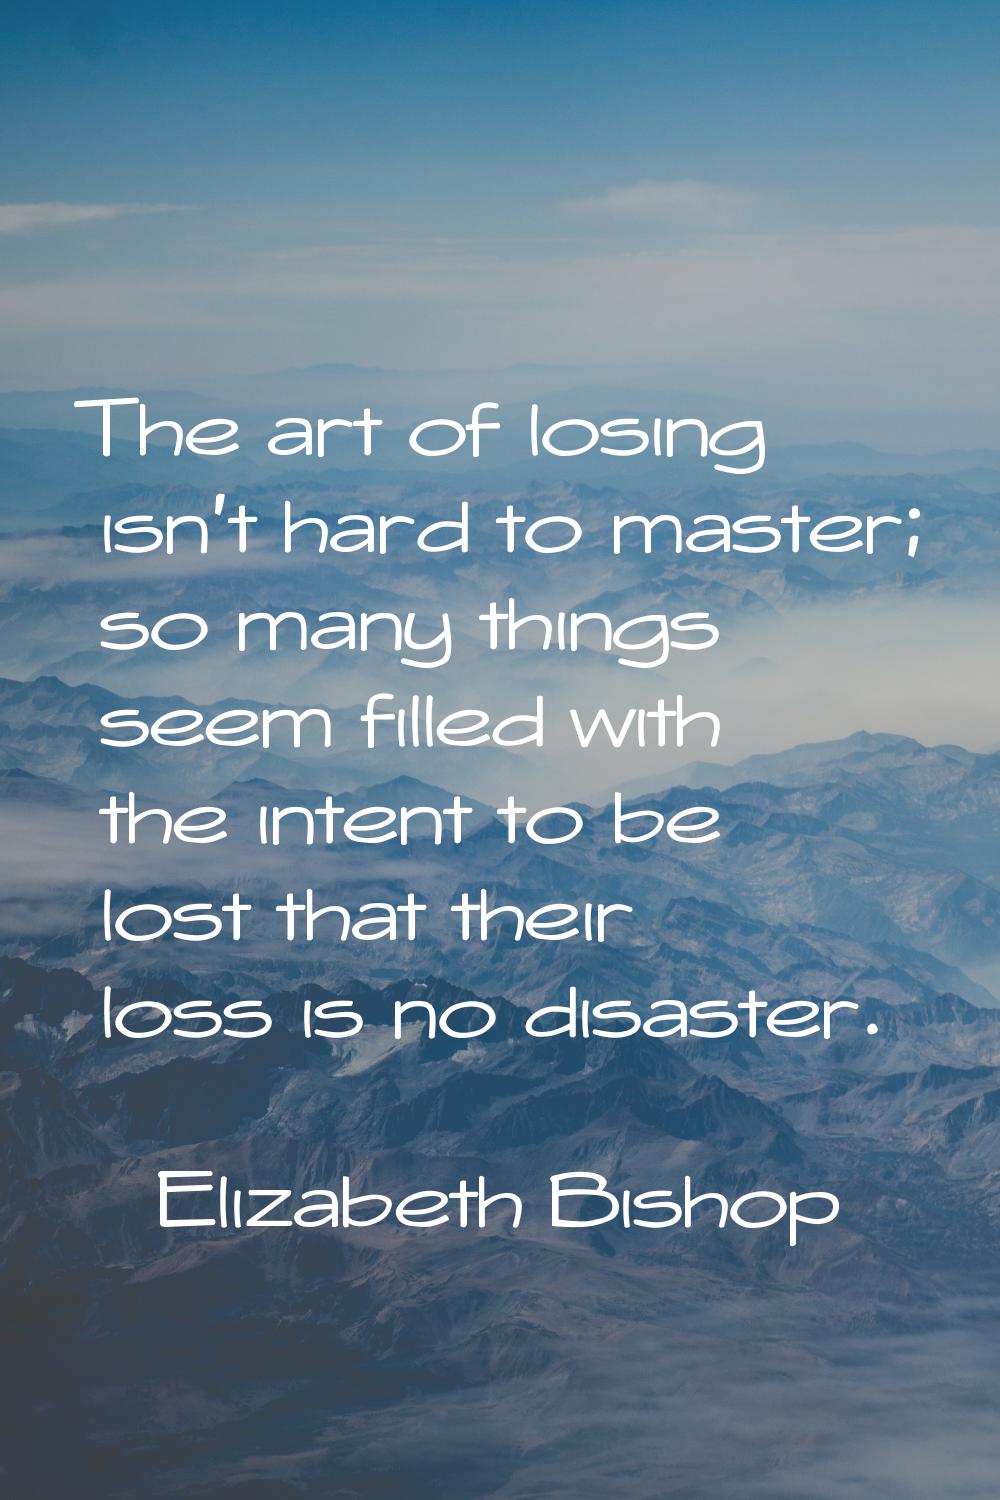 The art of losing isn't hard to master; so many things seem filled with the intent to be lost that 